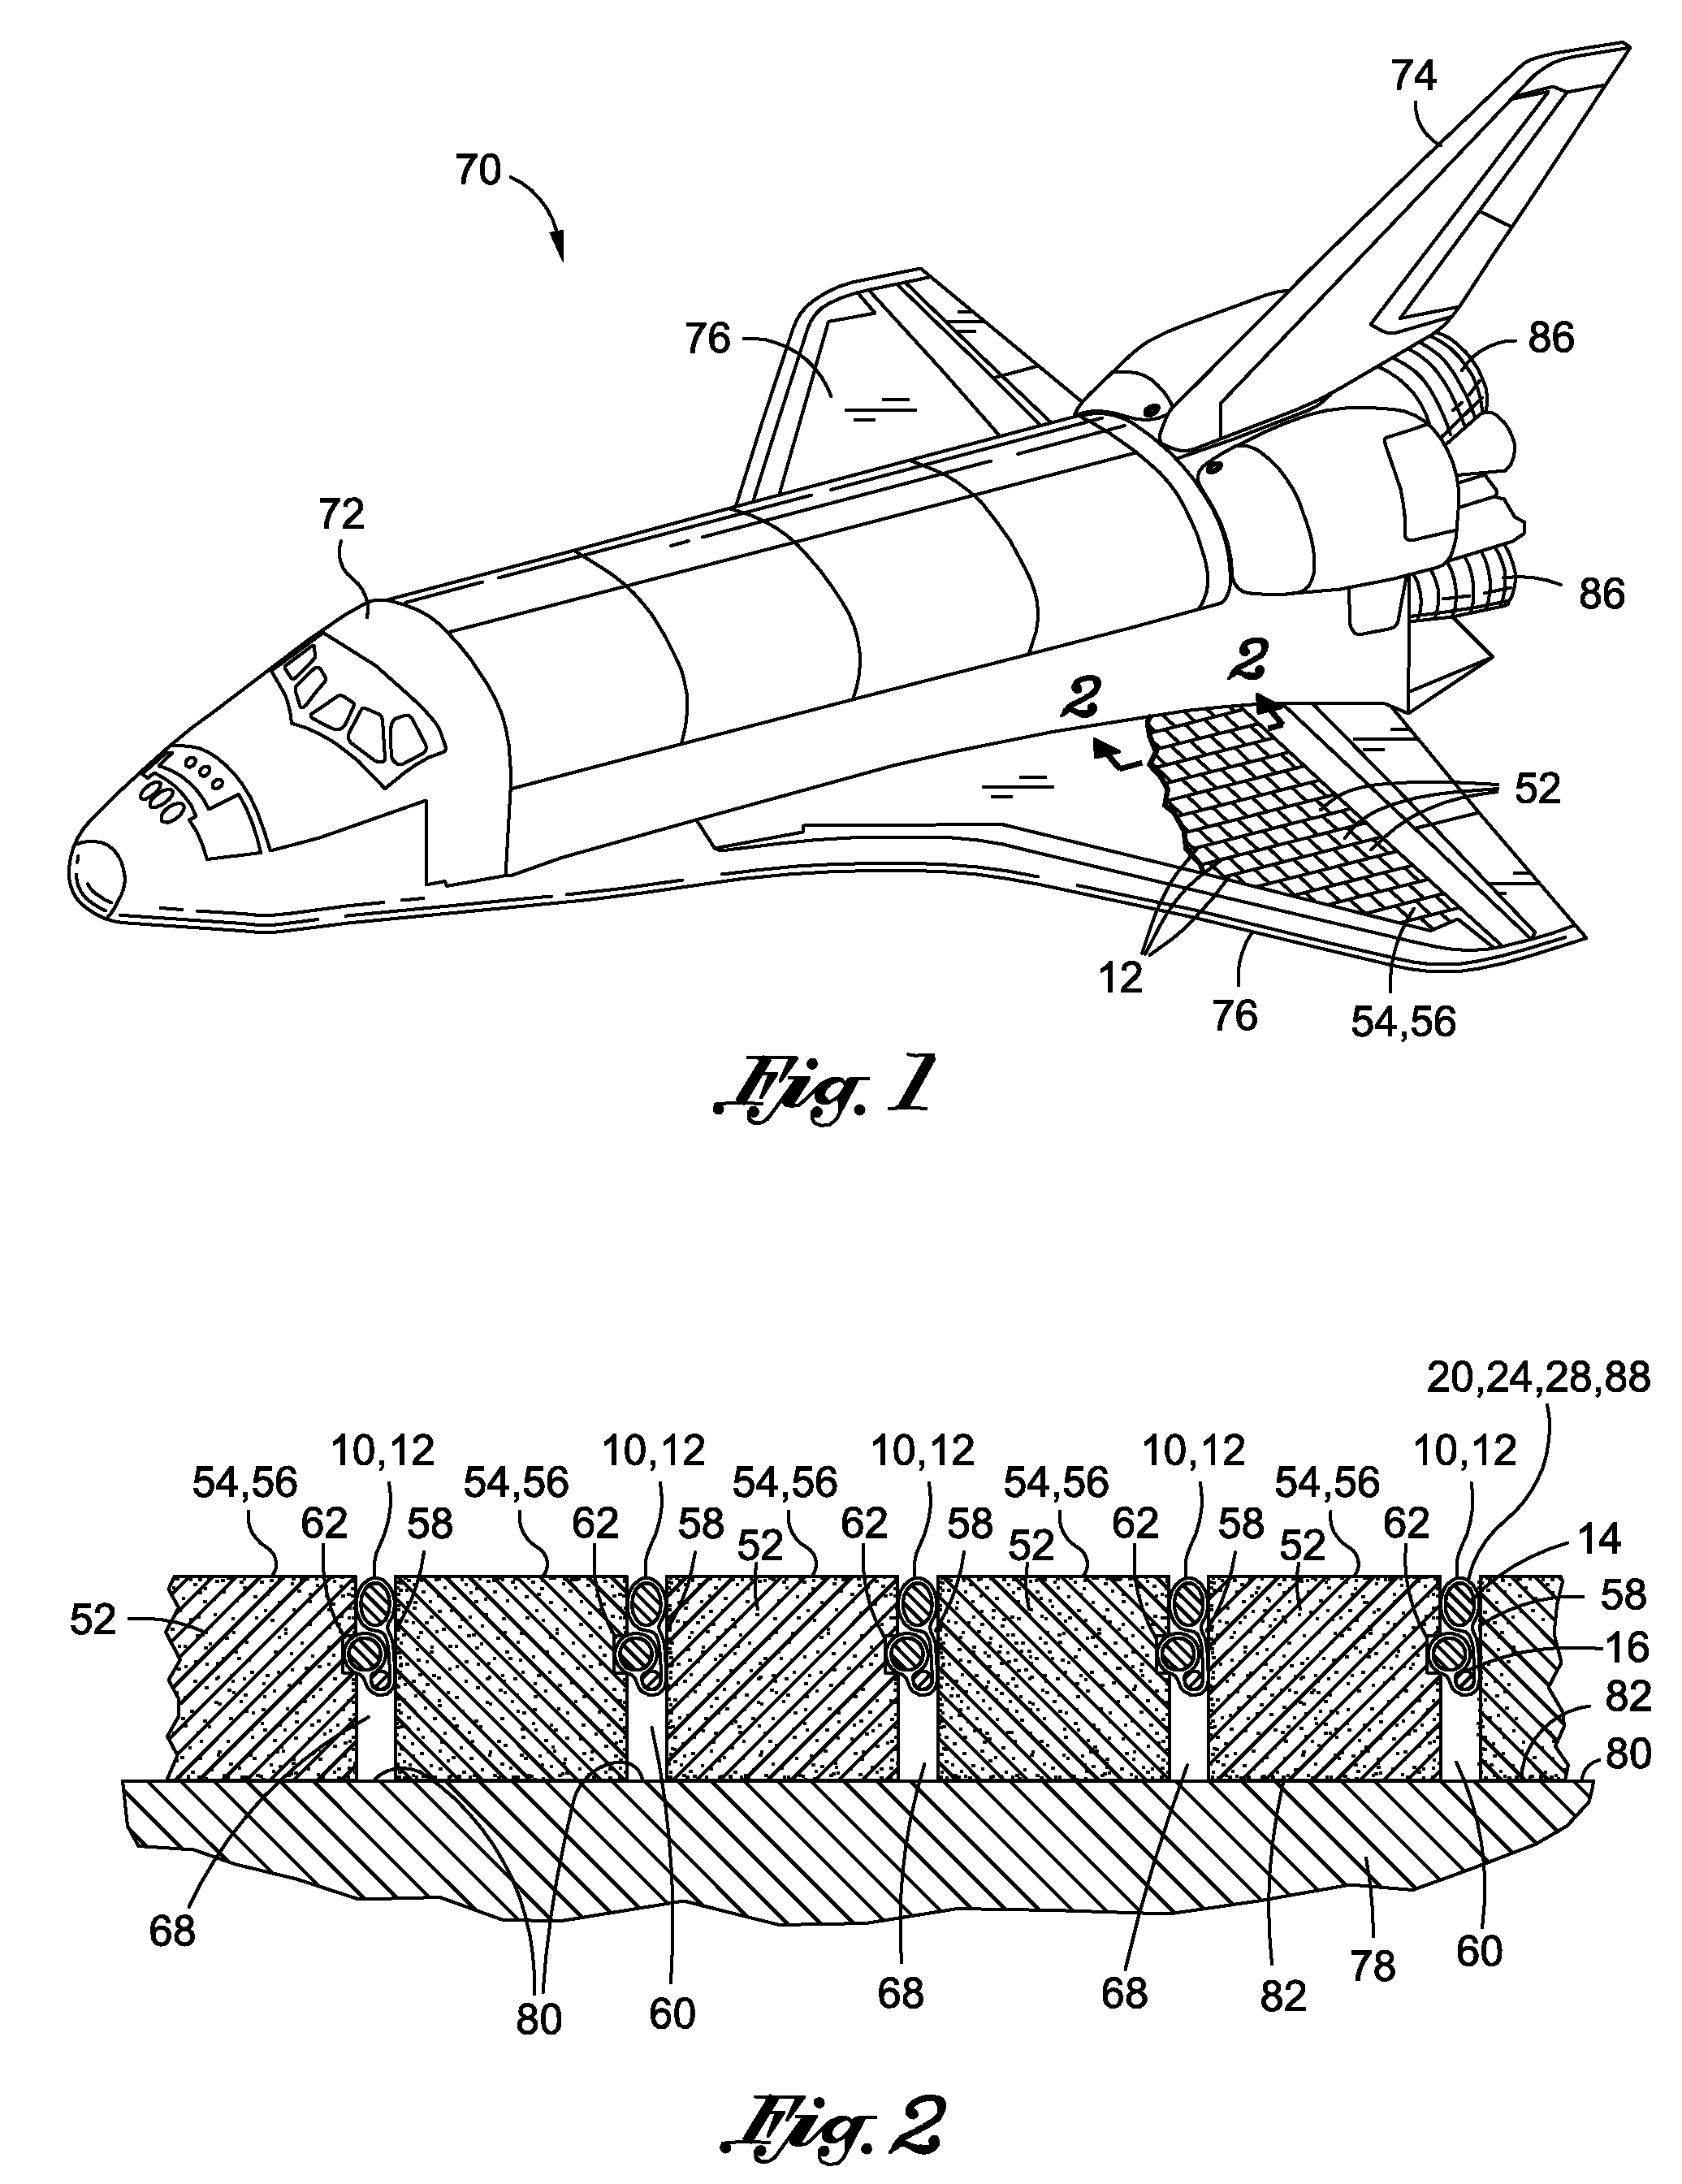 Tile gap seal assembly and method